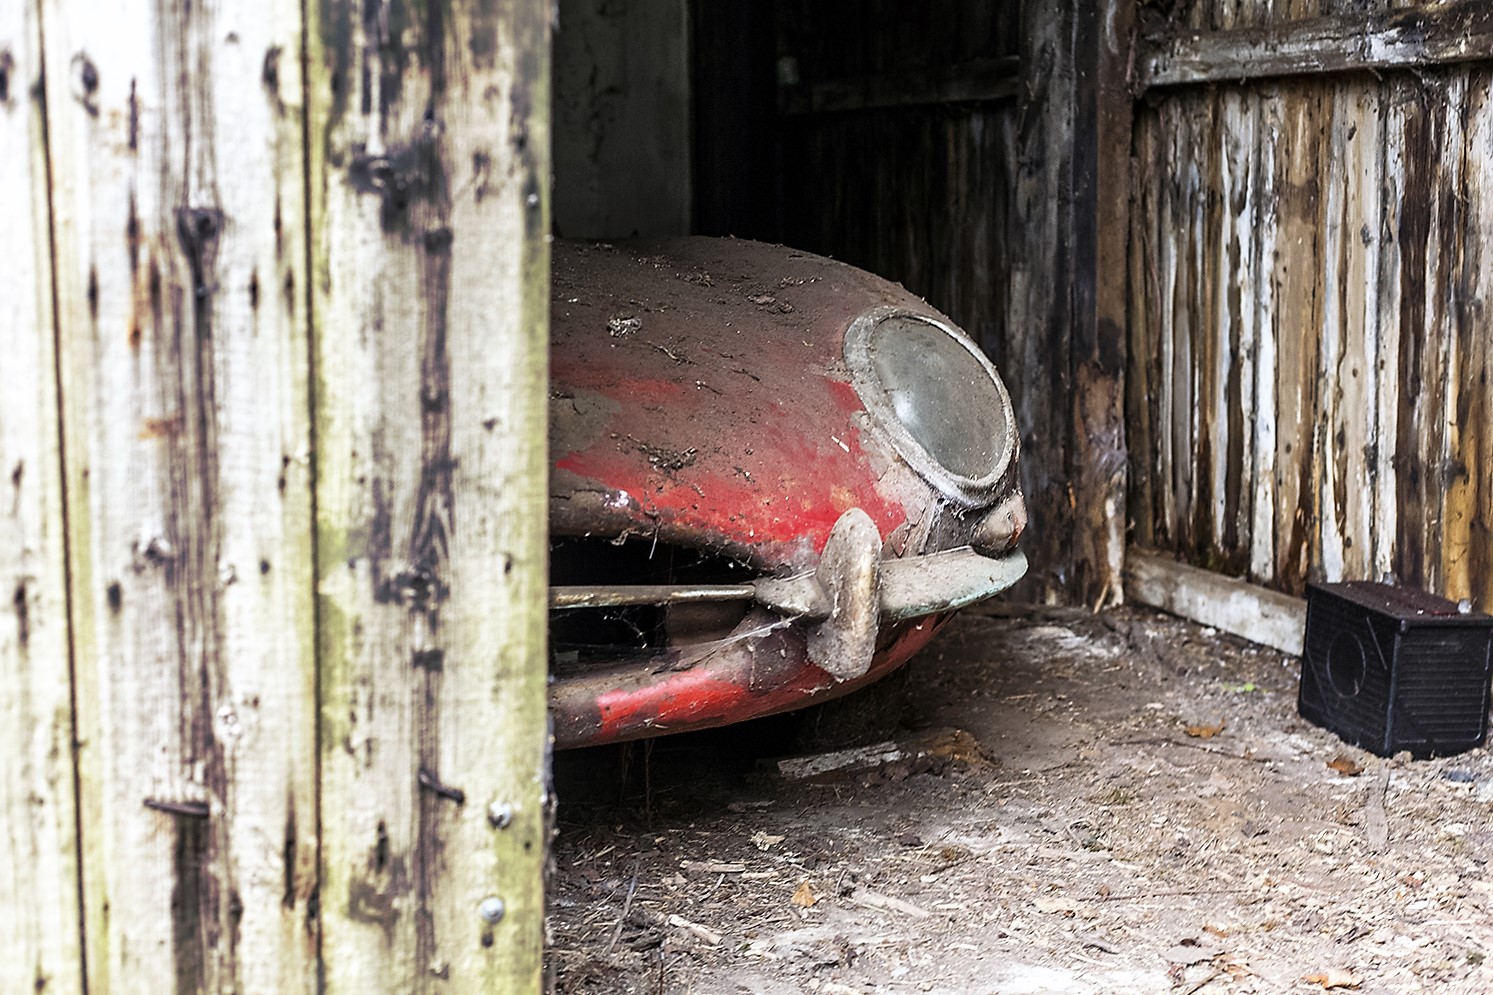 , Barn-find recovery of Jaguar E-type recorded in photos, ClassicCars.com Journal